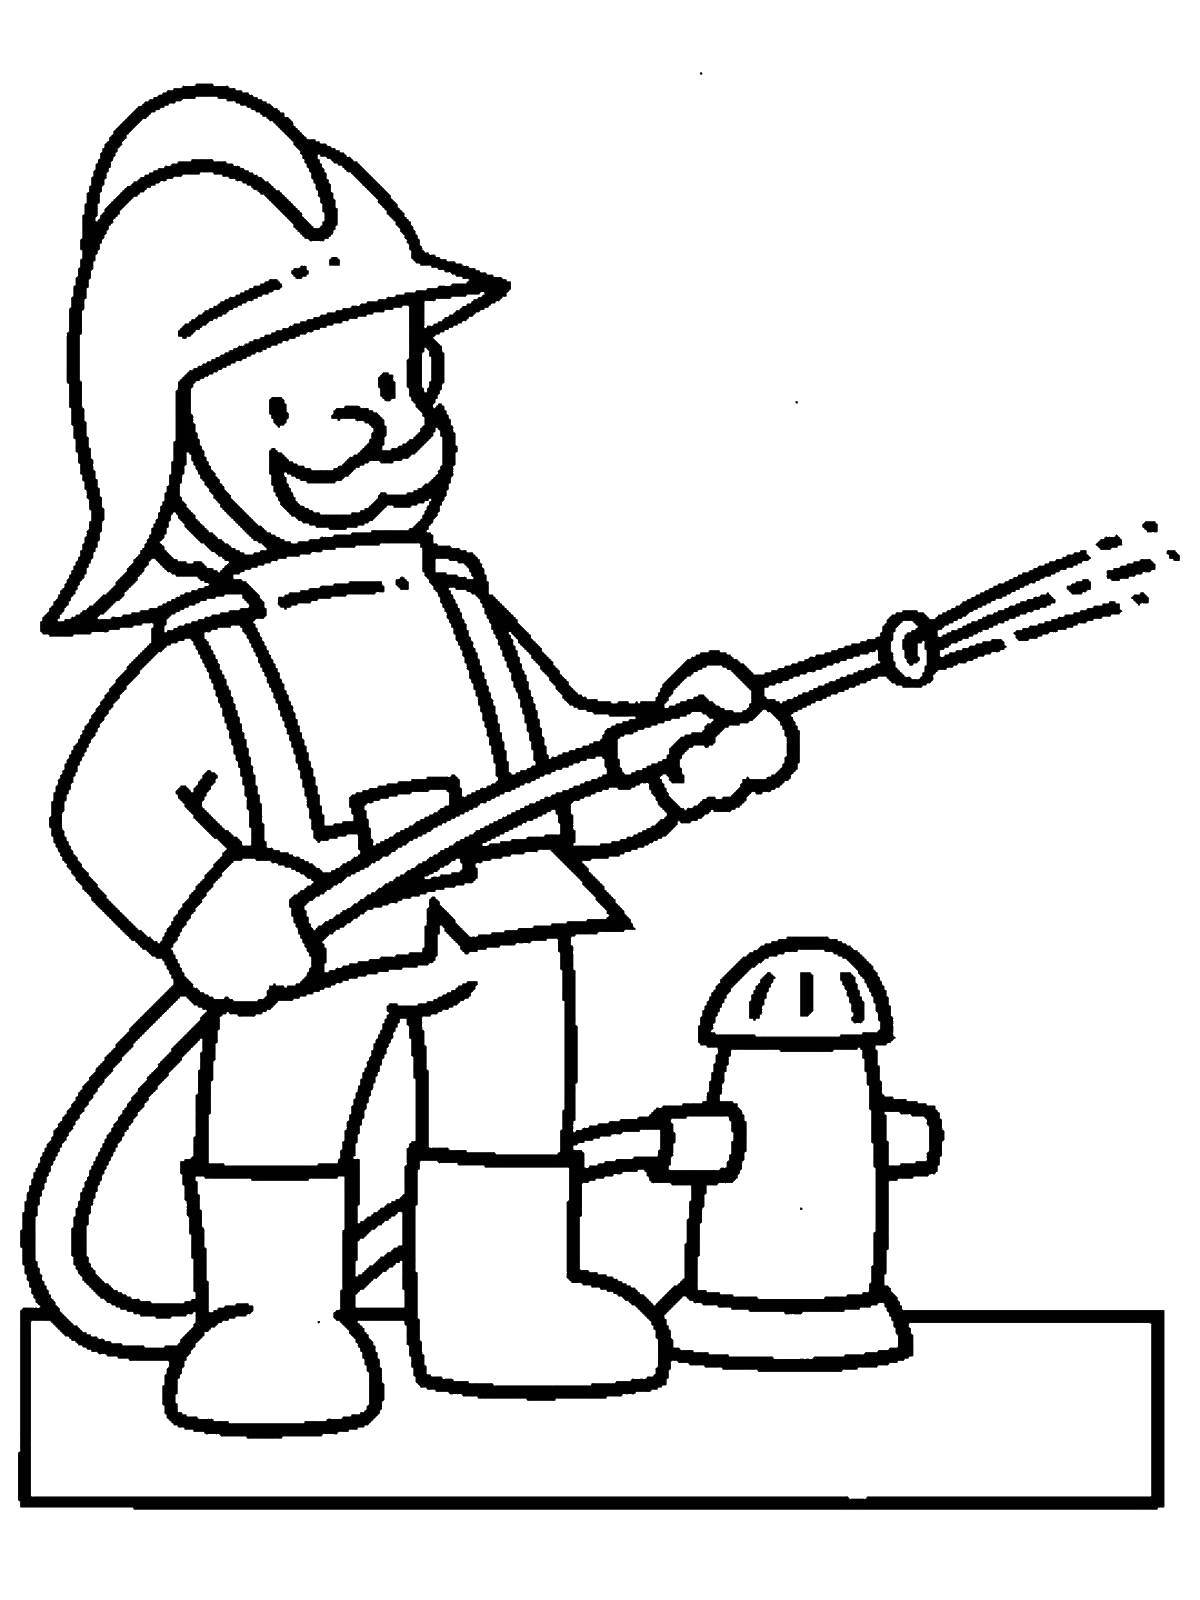 Coloring Firefighter with hose. Category a profession. Tags:  profession, firefighter, hose.